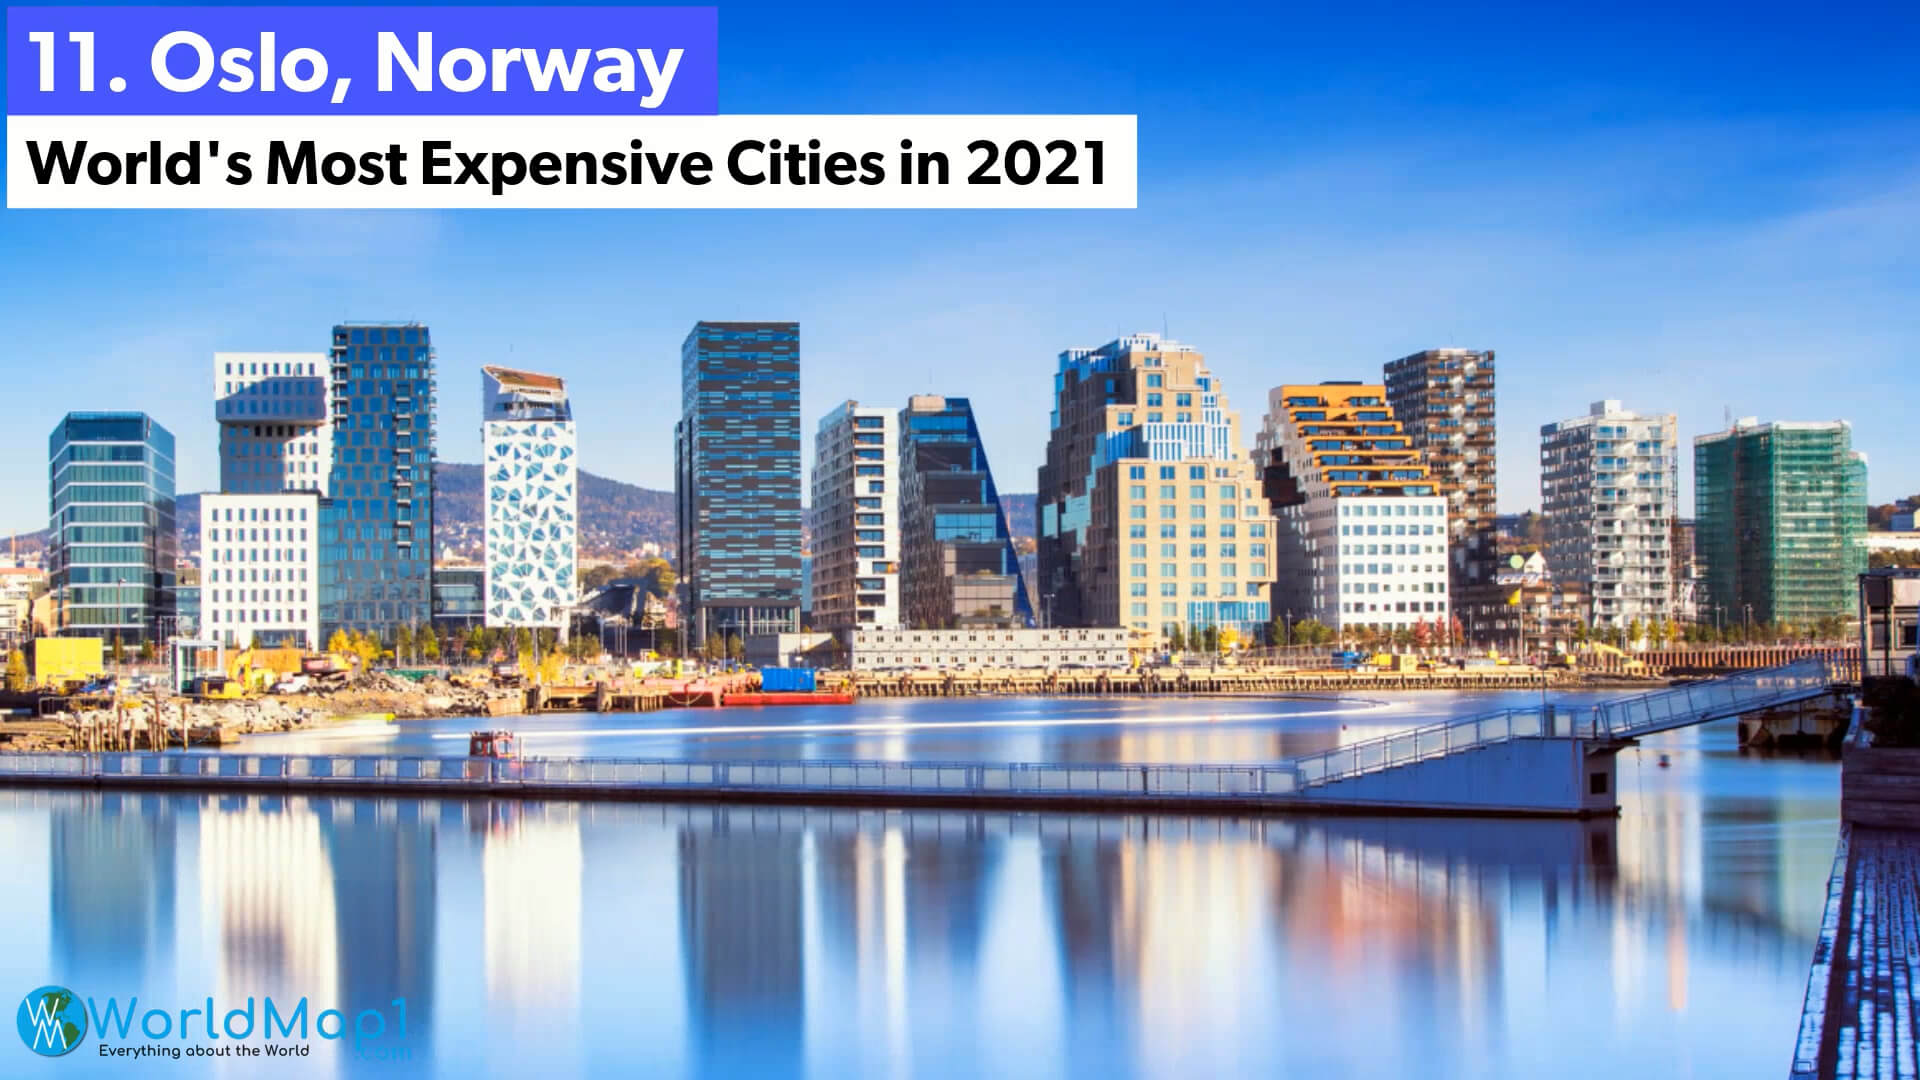 World's Most Expensive Cities - Oslo, Norway